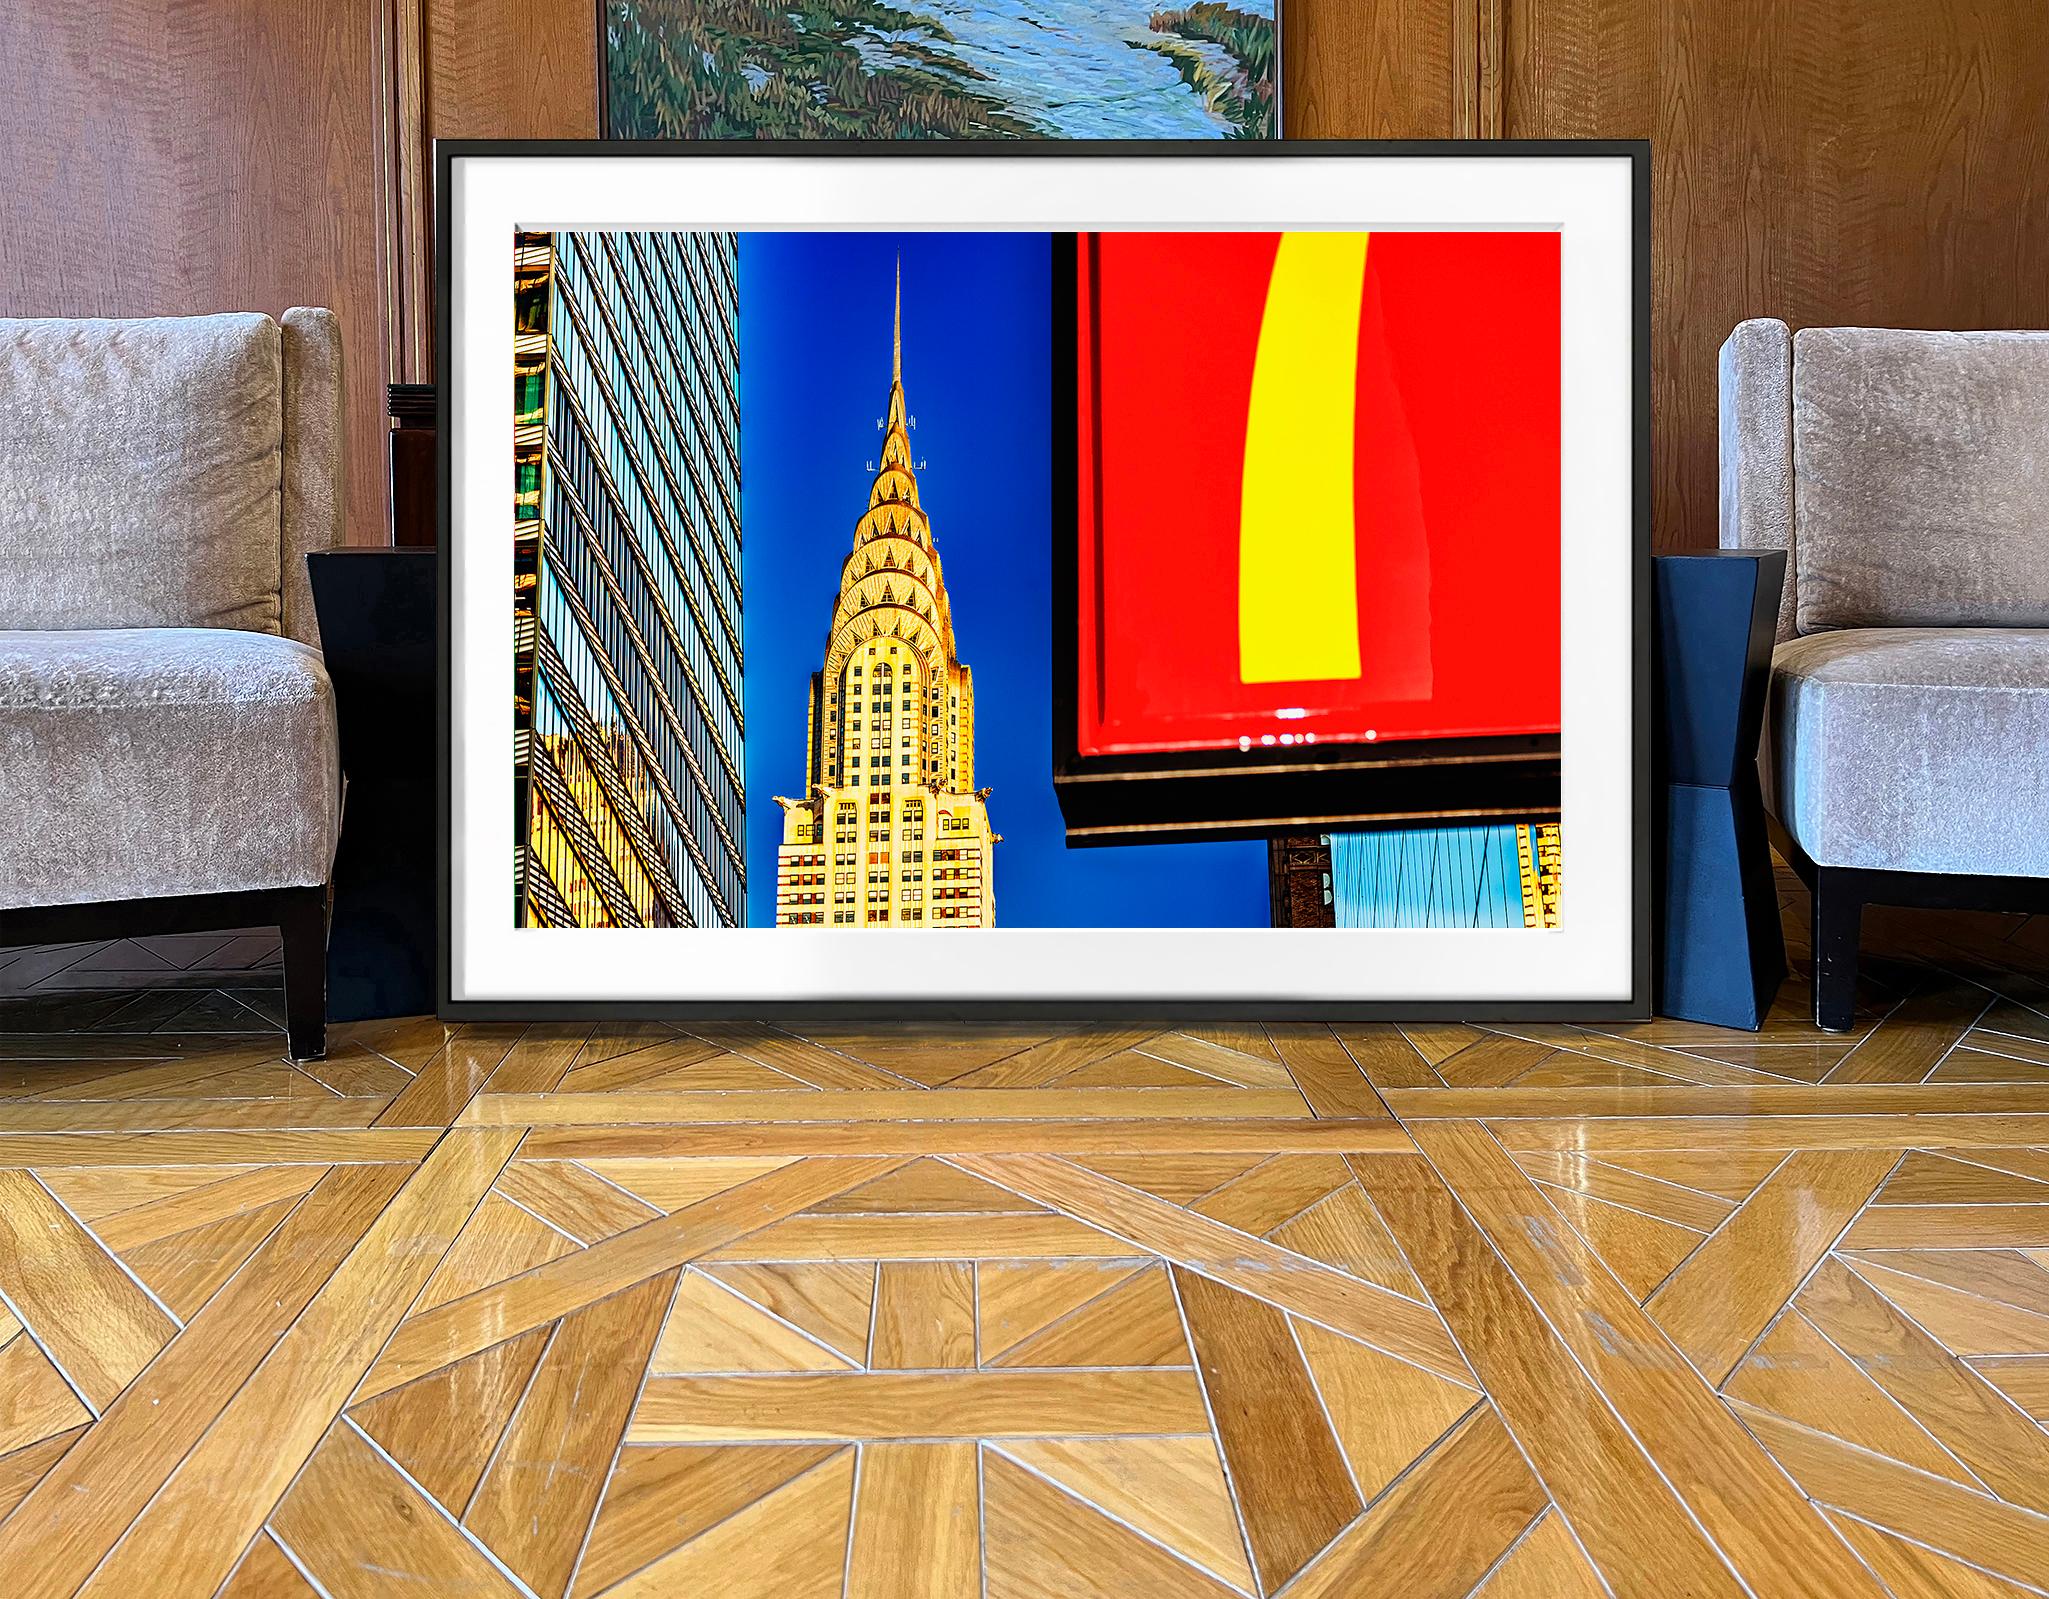 Chrysler Building Spire and McDonald's Graphic Red Sign - Abstract Geometric Photograph by Mitchell Funk